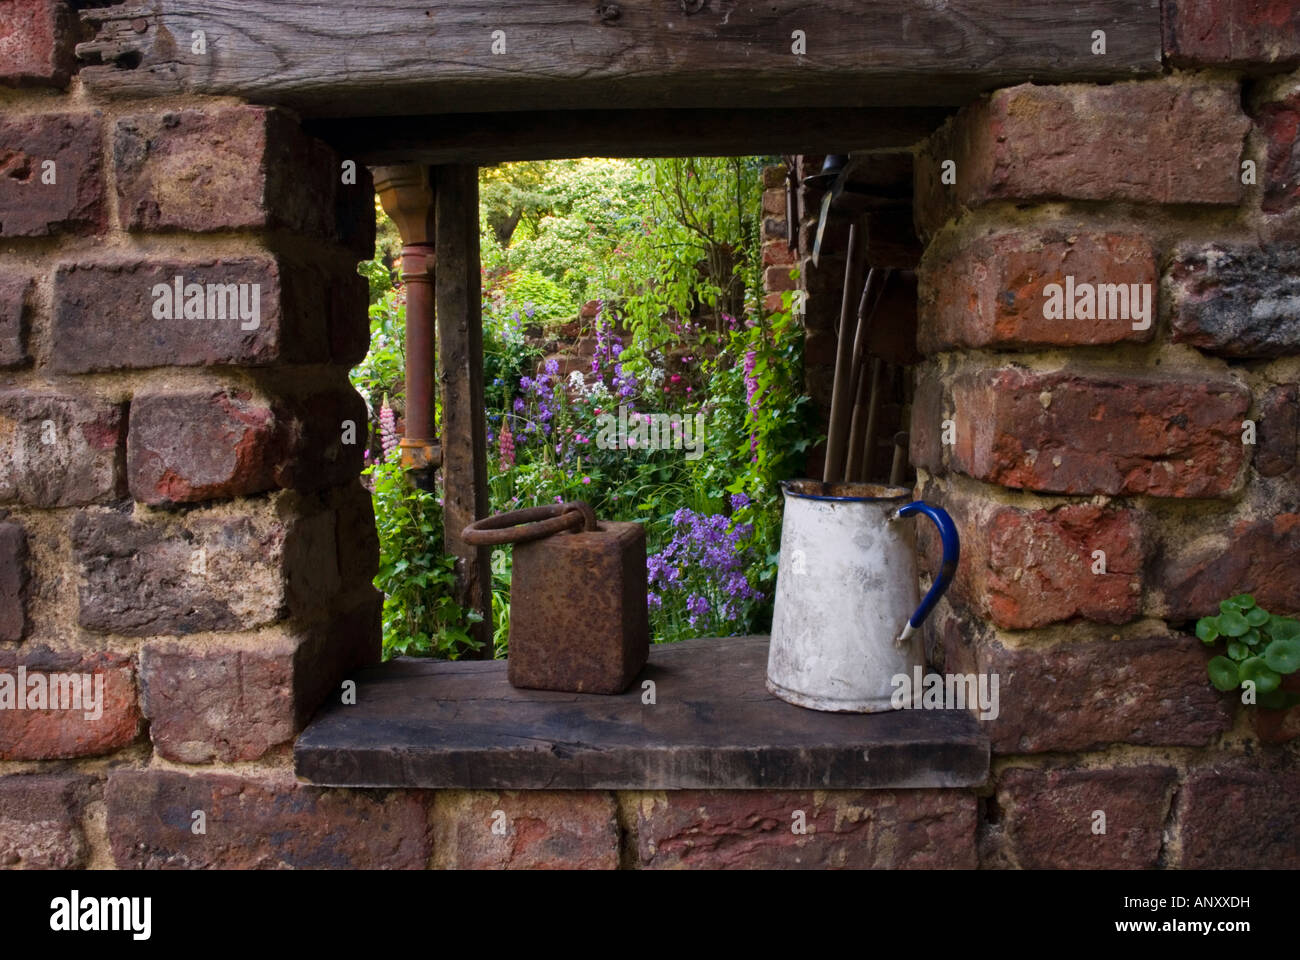 Window view into secret garden from brick wall with rustic jug ornament, with flowers and plants glimpsed beyond discover Stock Photo